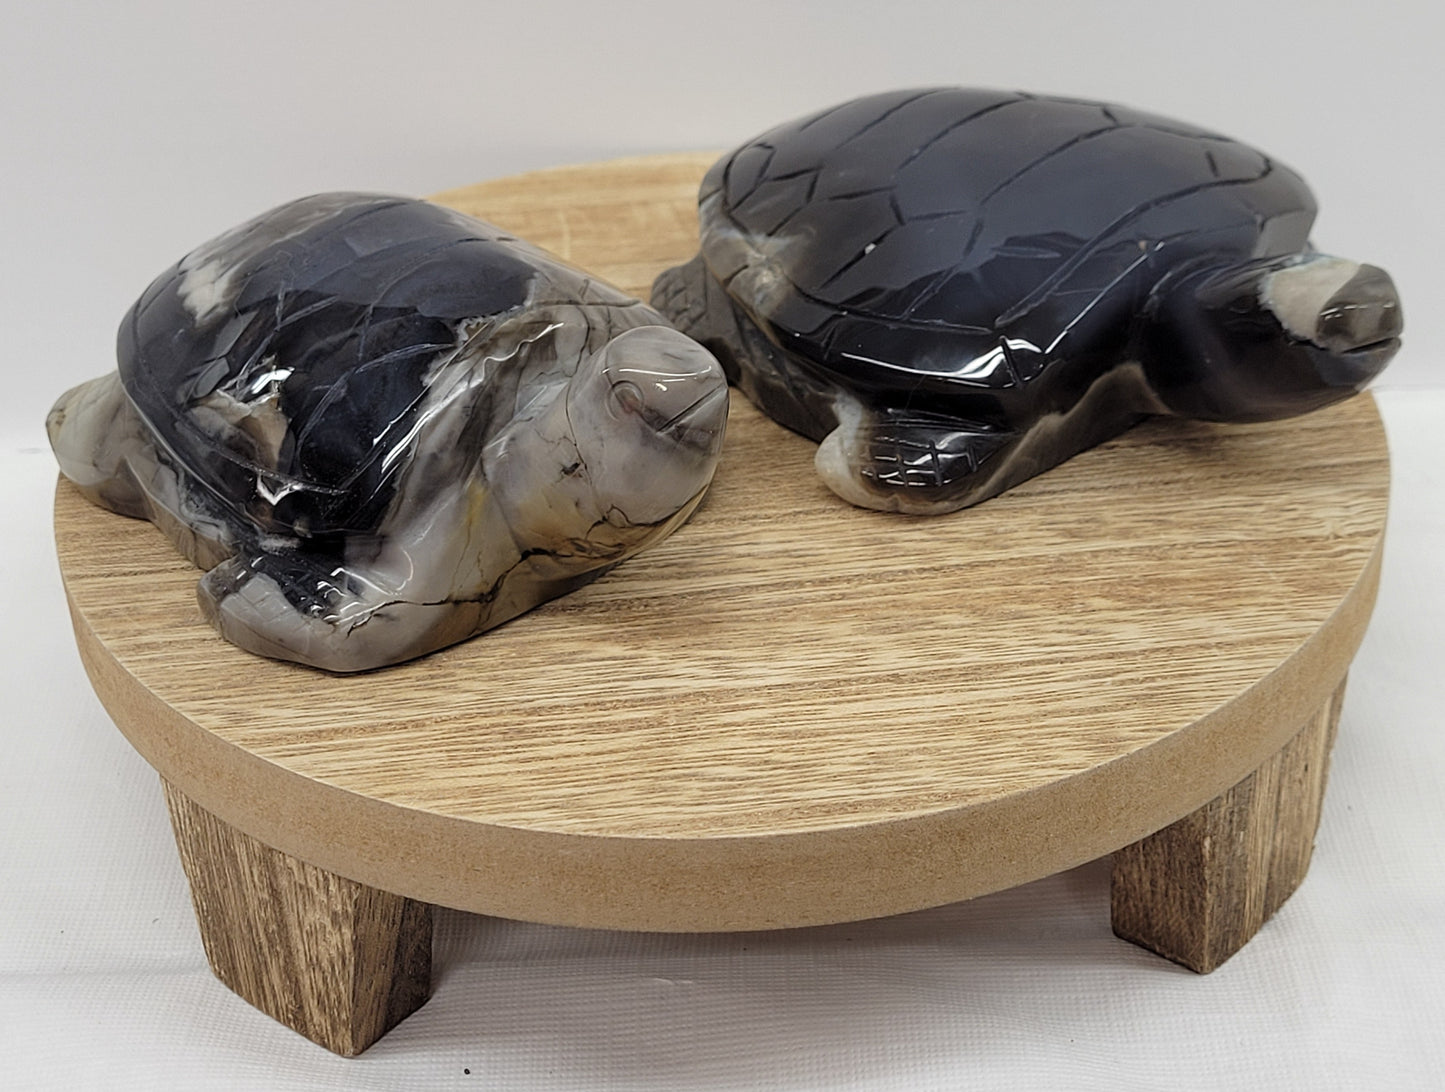 Volcano Agate turtle carvings